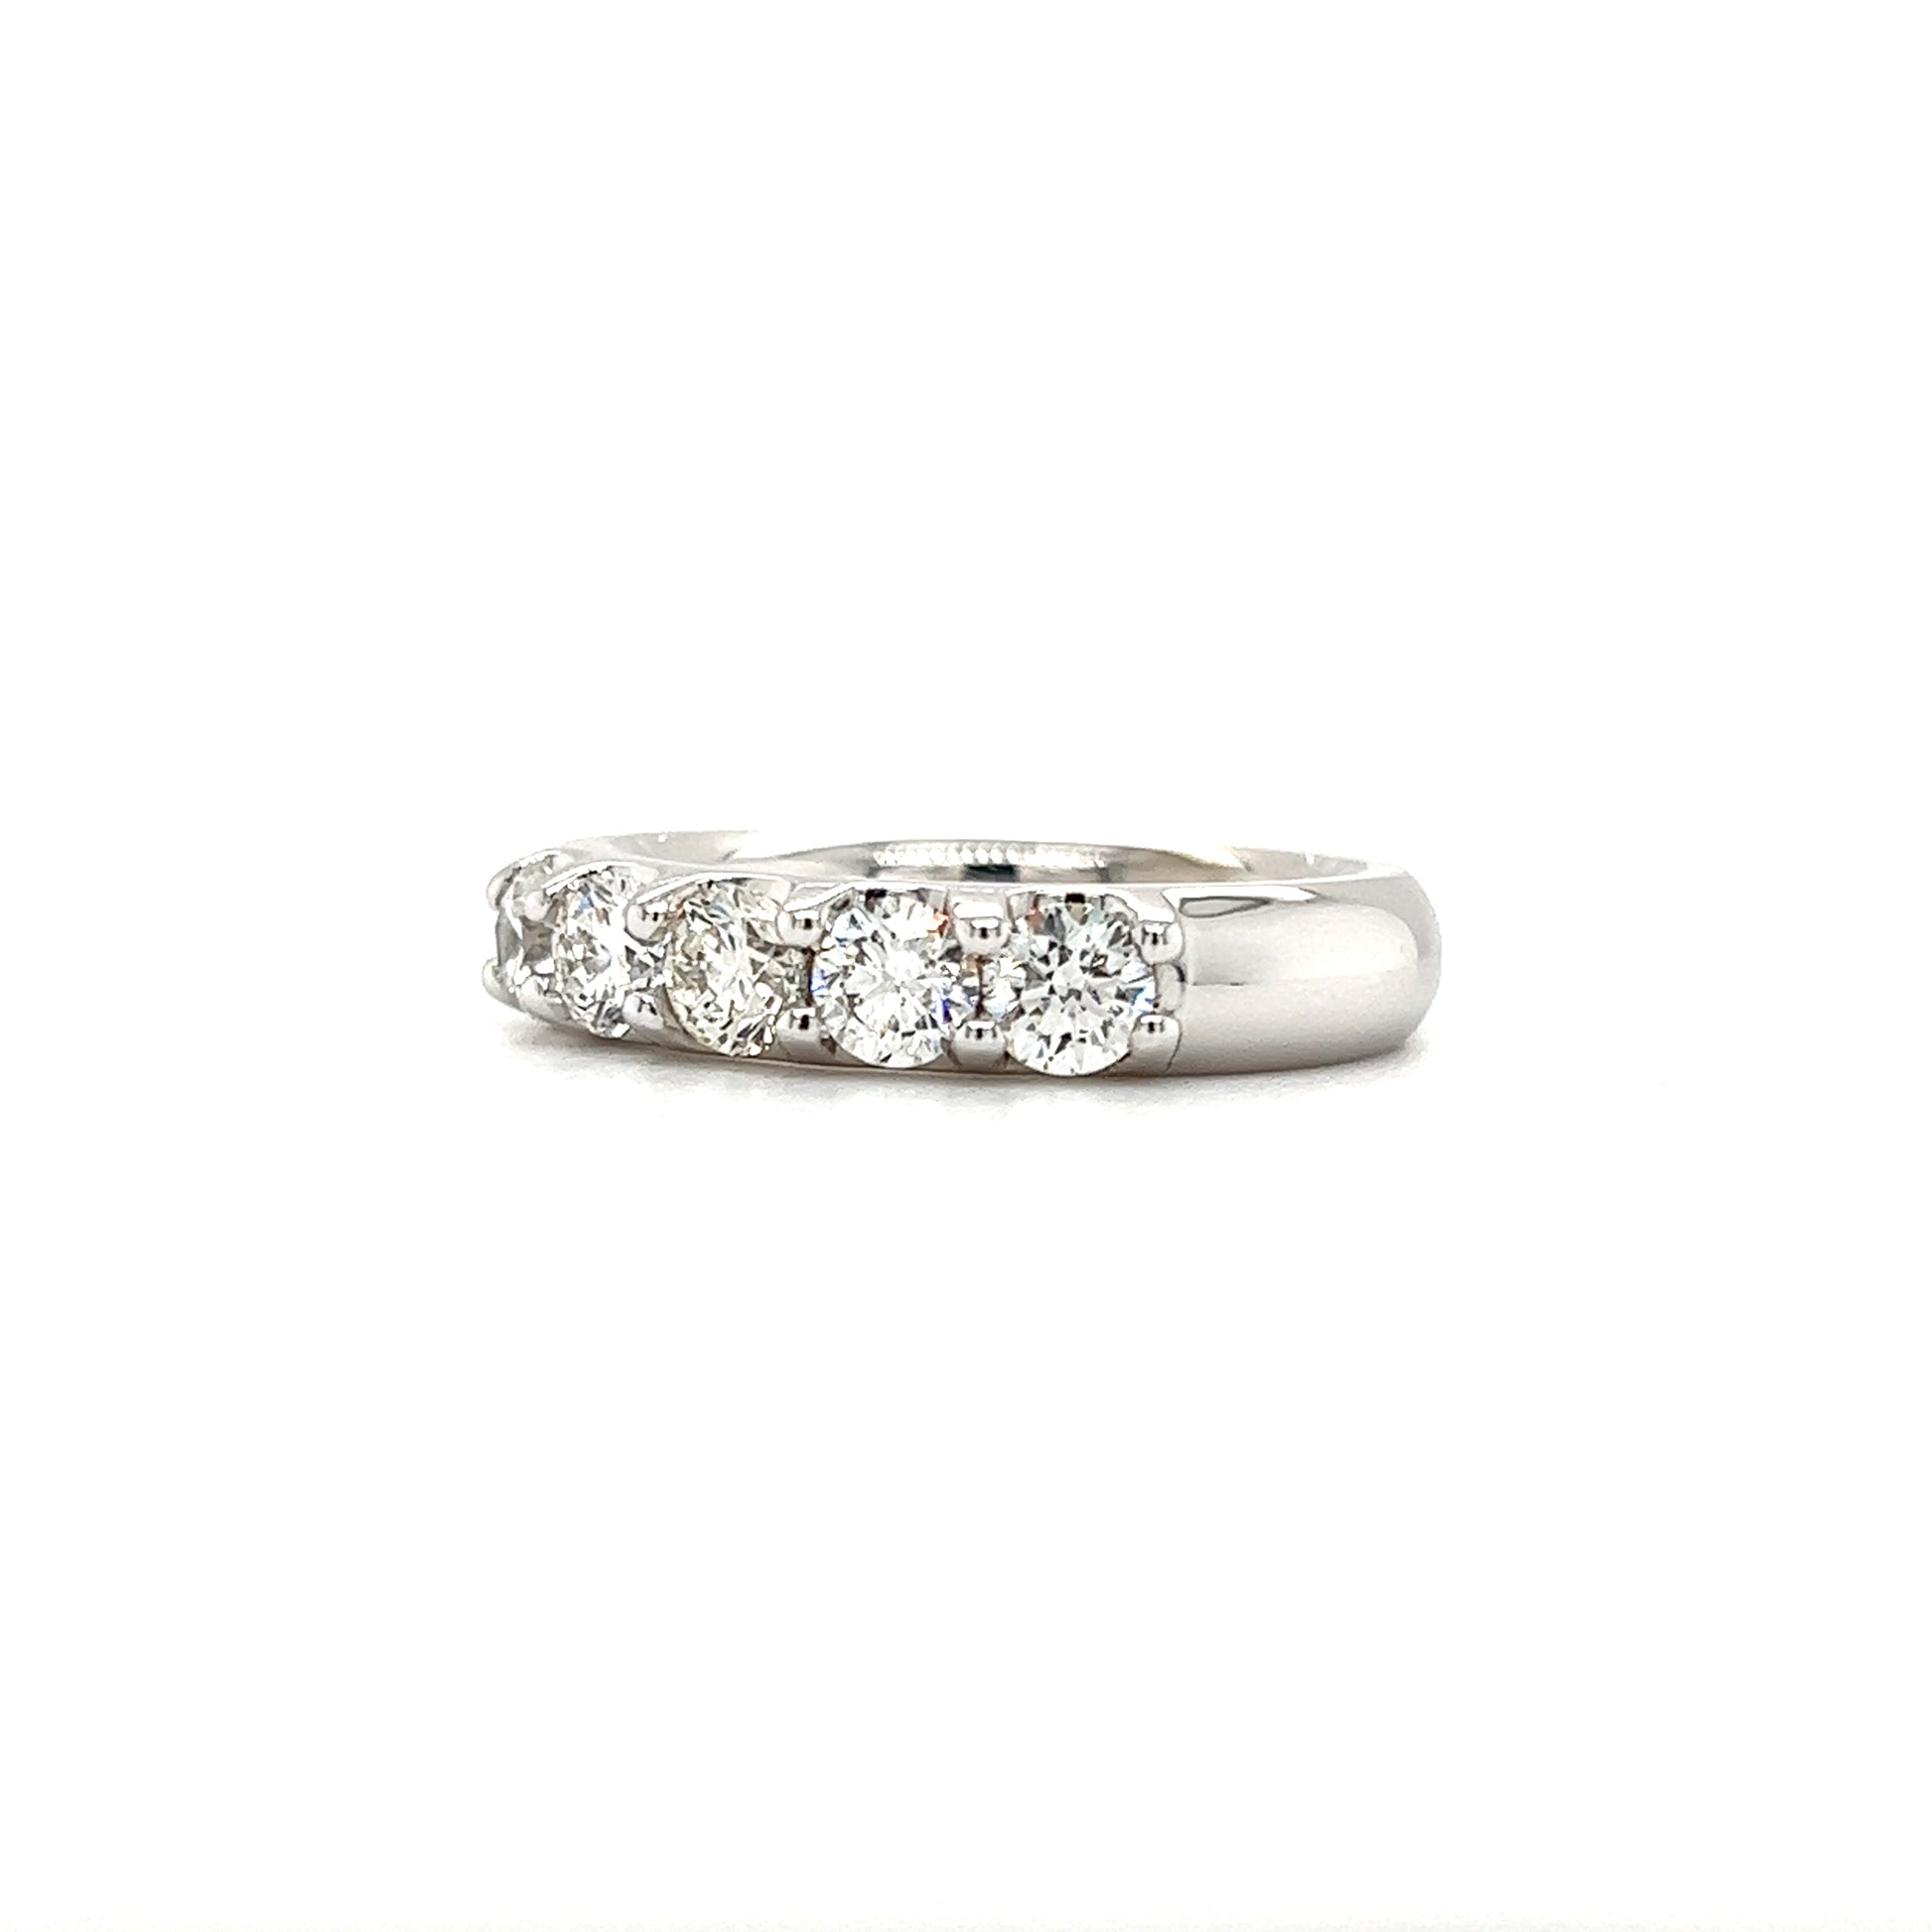 Diamond Ring 4mm with 1.24ctw of Diamonds in 14K White Gold Right View